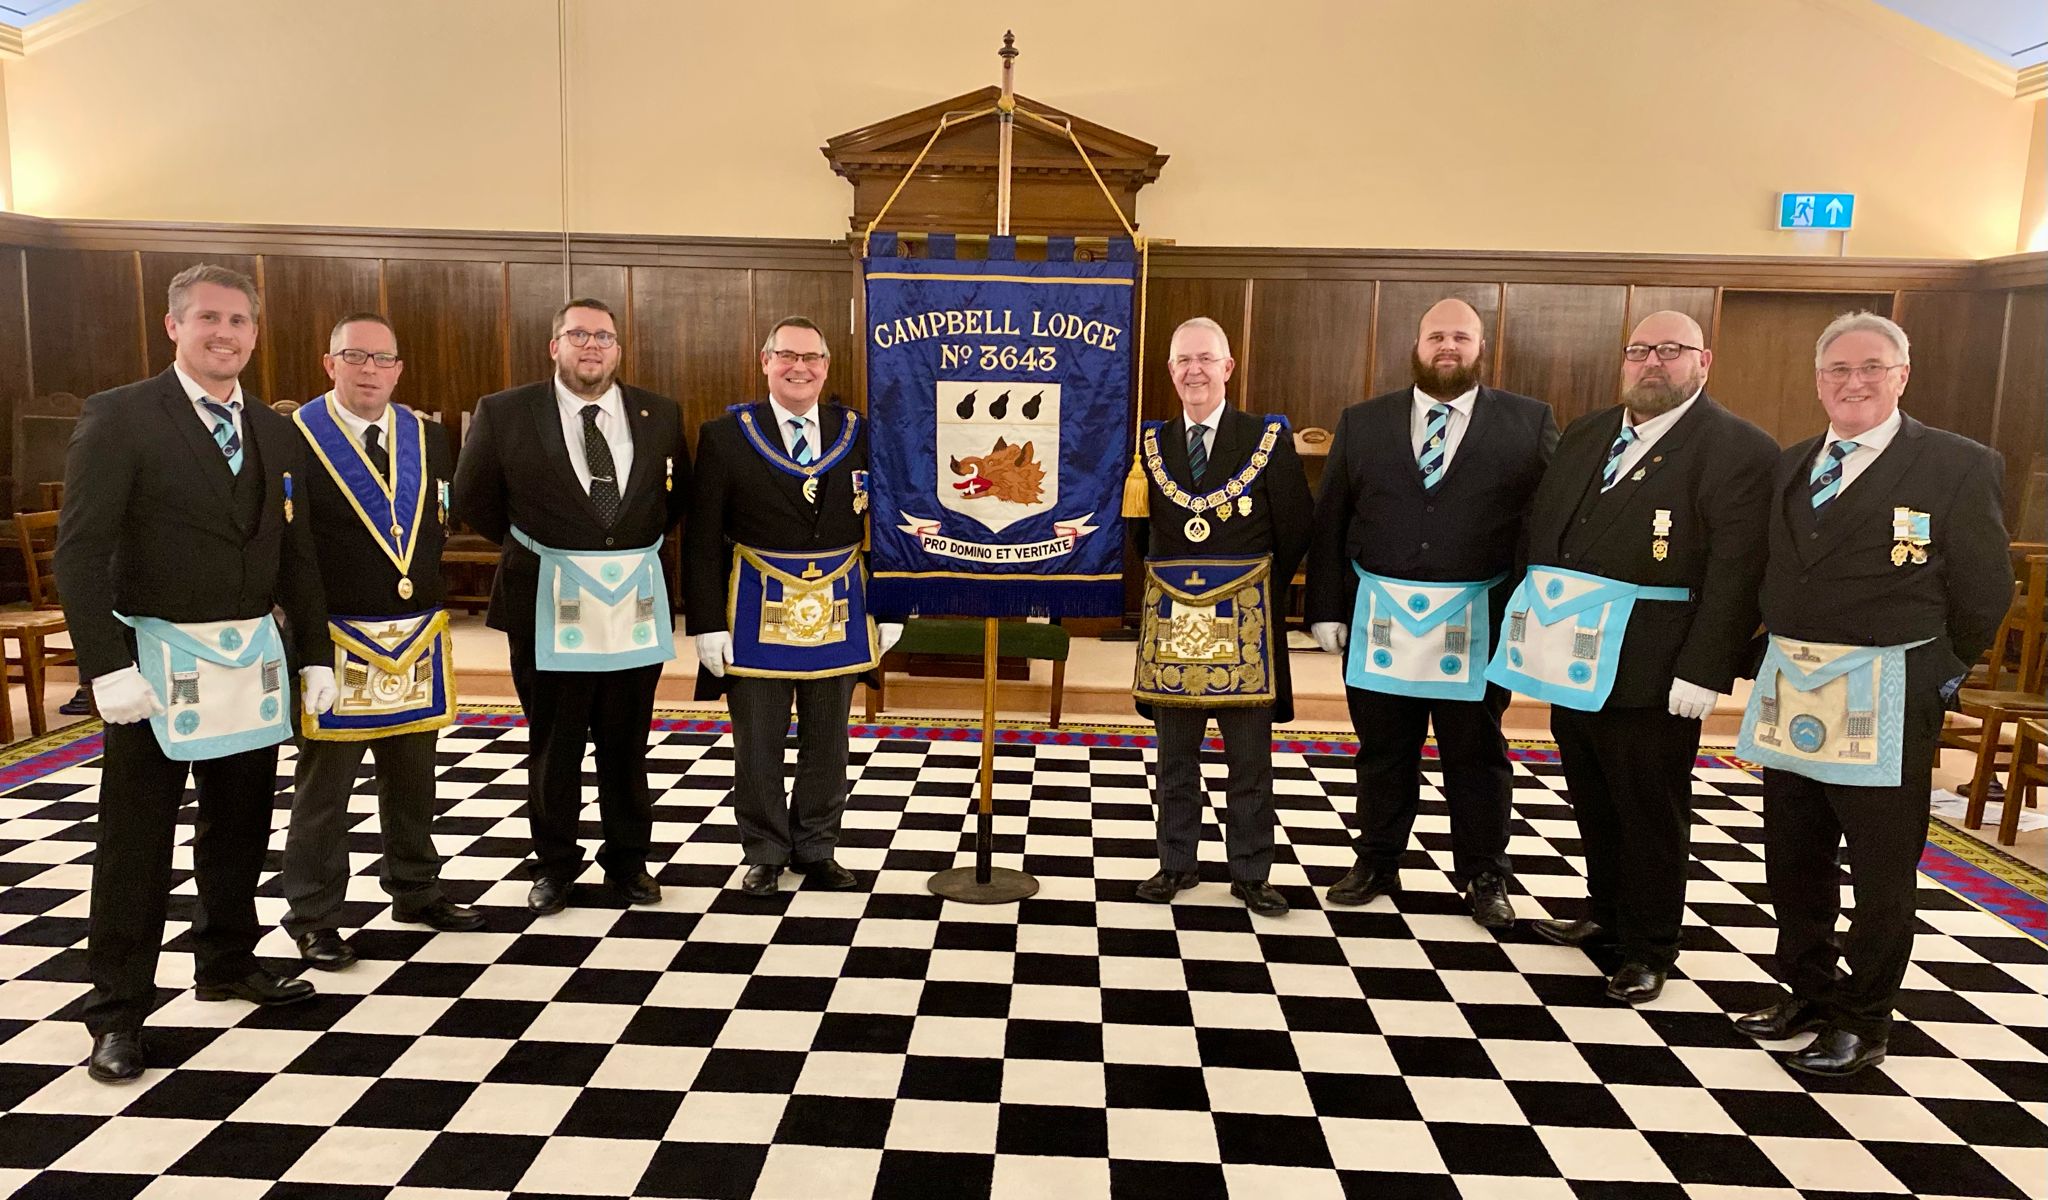 Banner rededication in Worcestershire